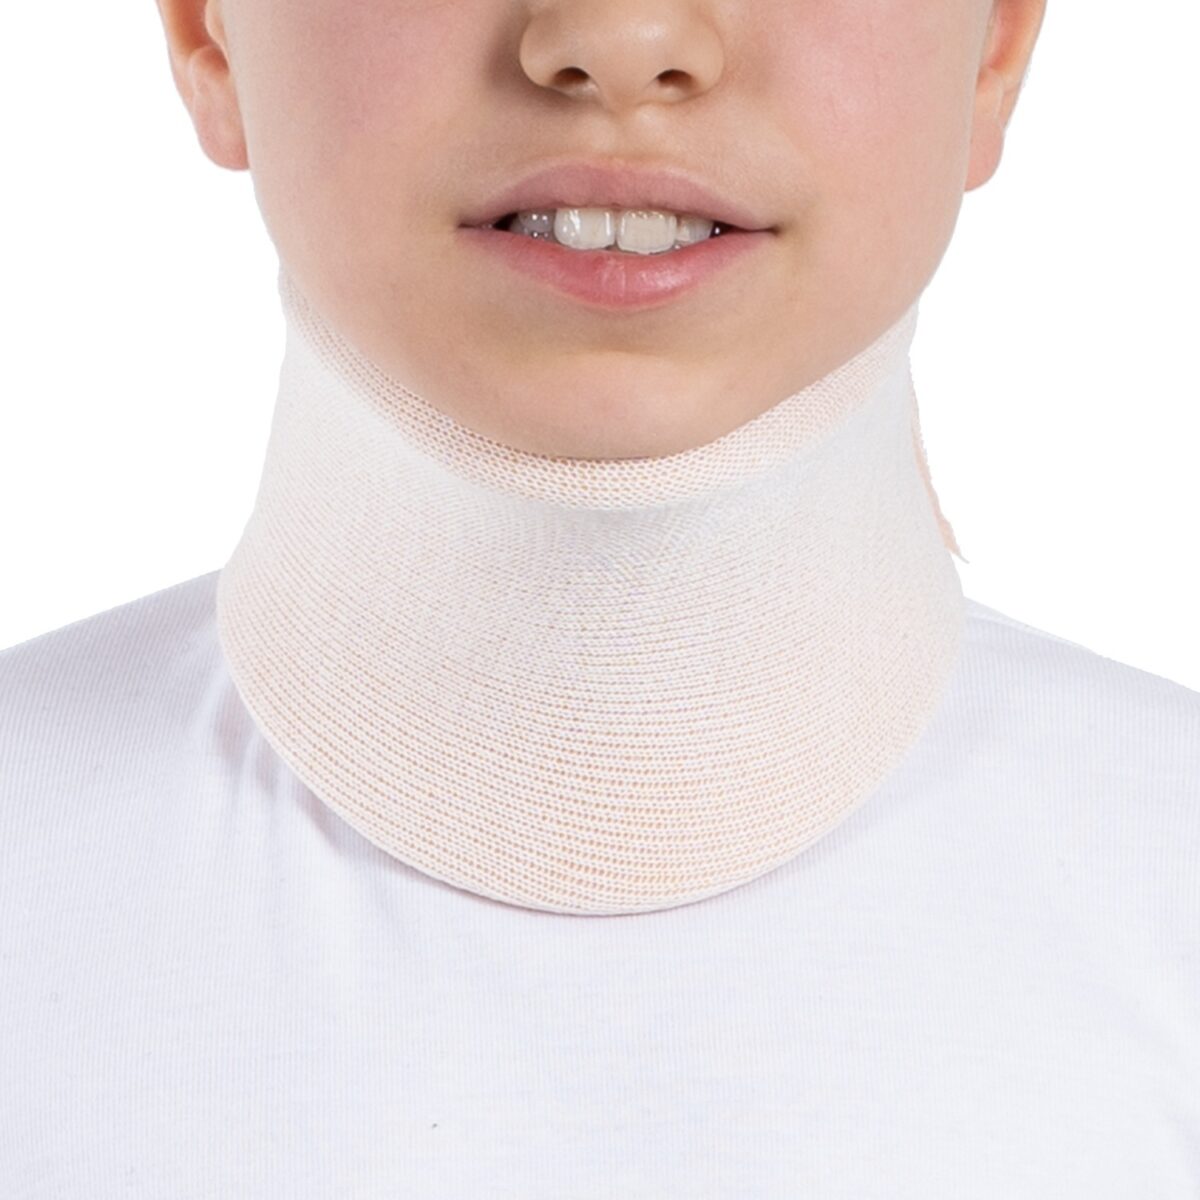 wingmed orthopedic equipments W903 nelson collar with fabric coated 66